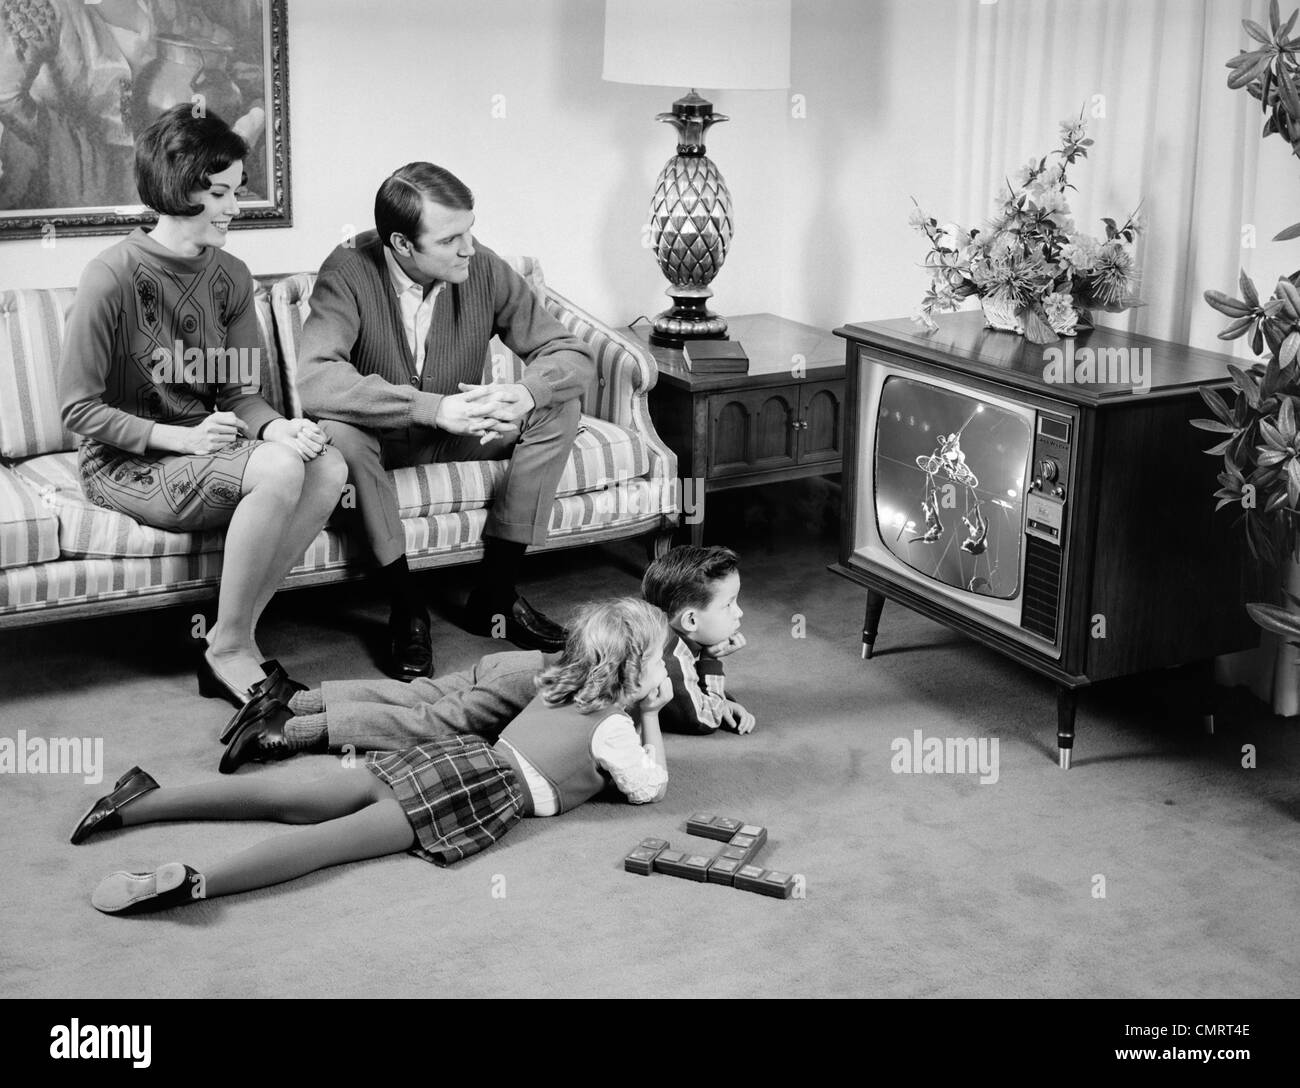 [Image: 1960s-family-of-4-watching-television-in...CMRT4E.jpg]